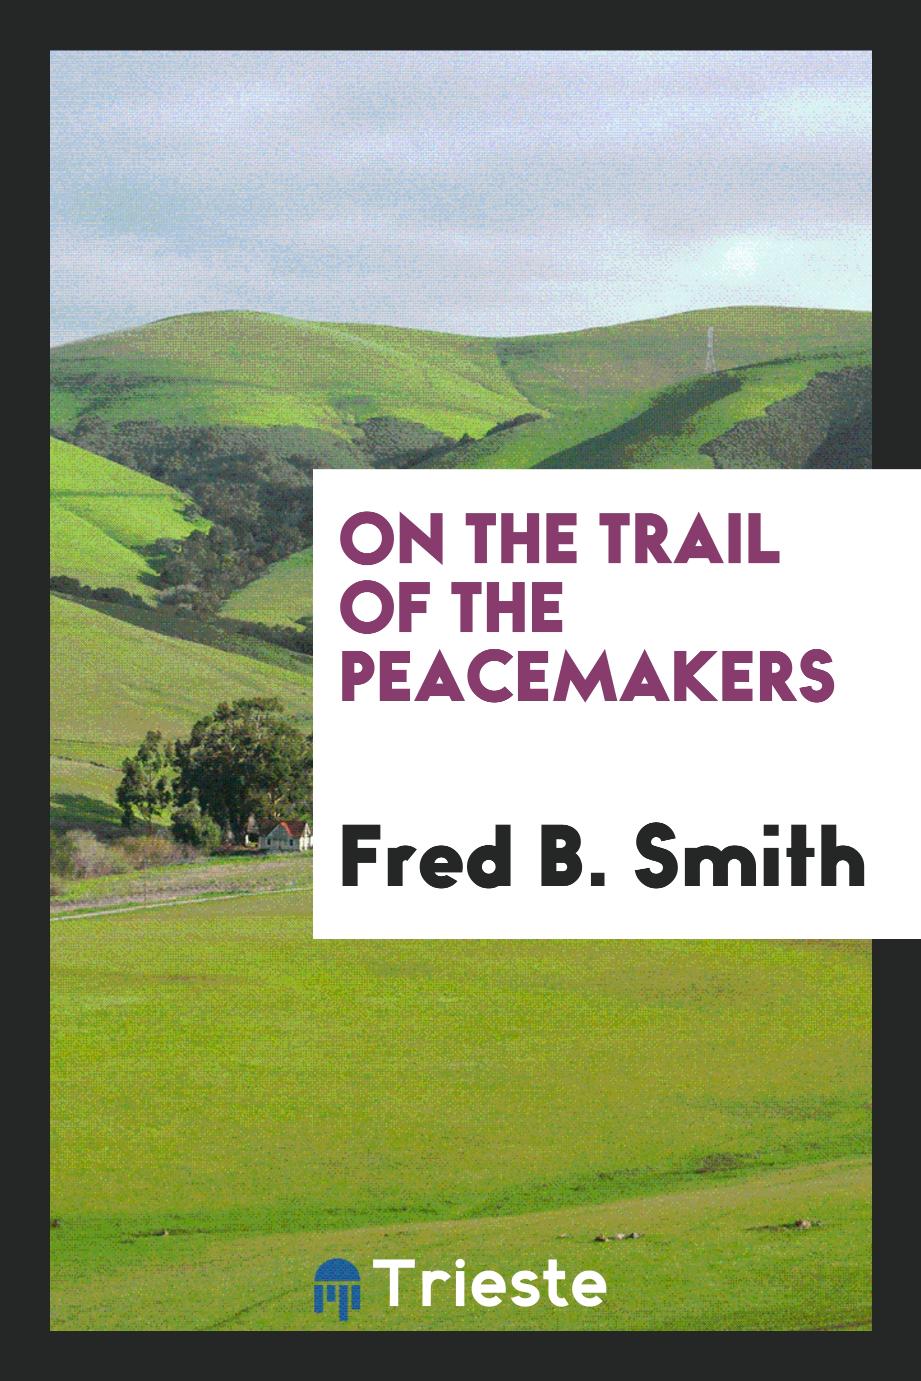 On the trail of the peacemakers